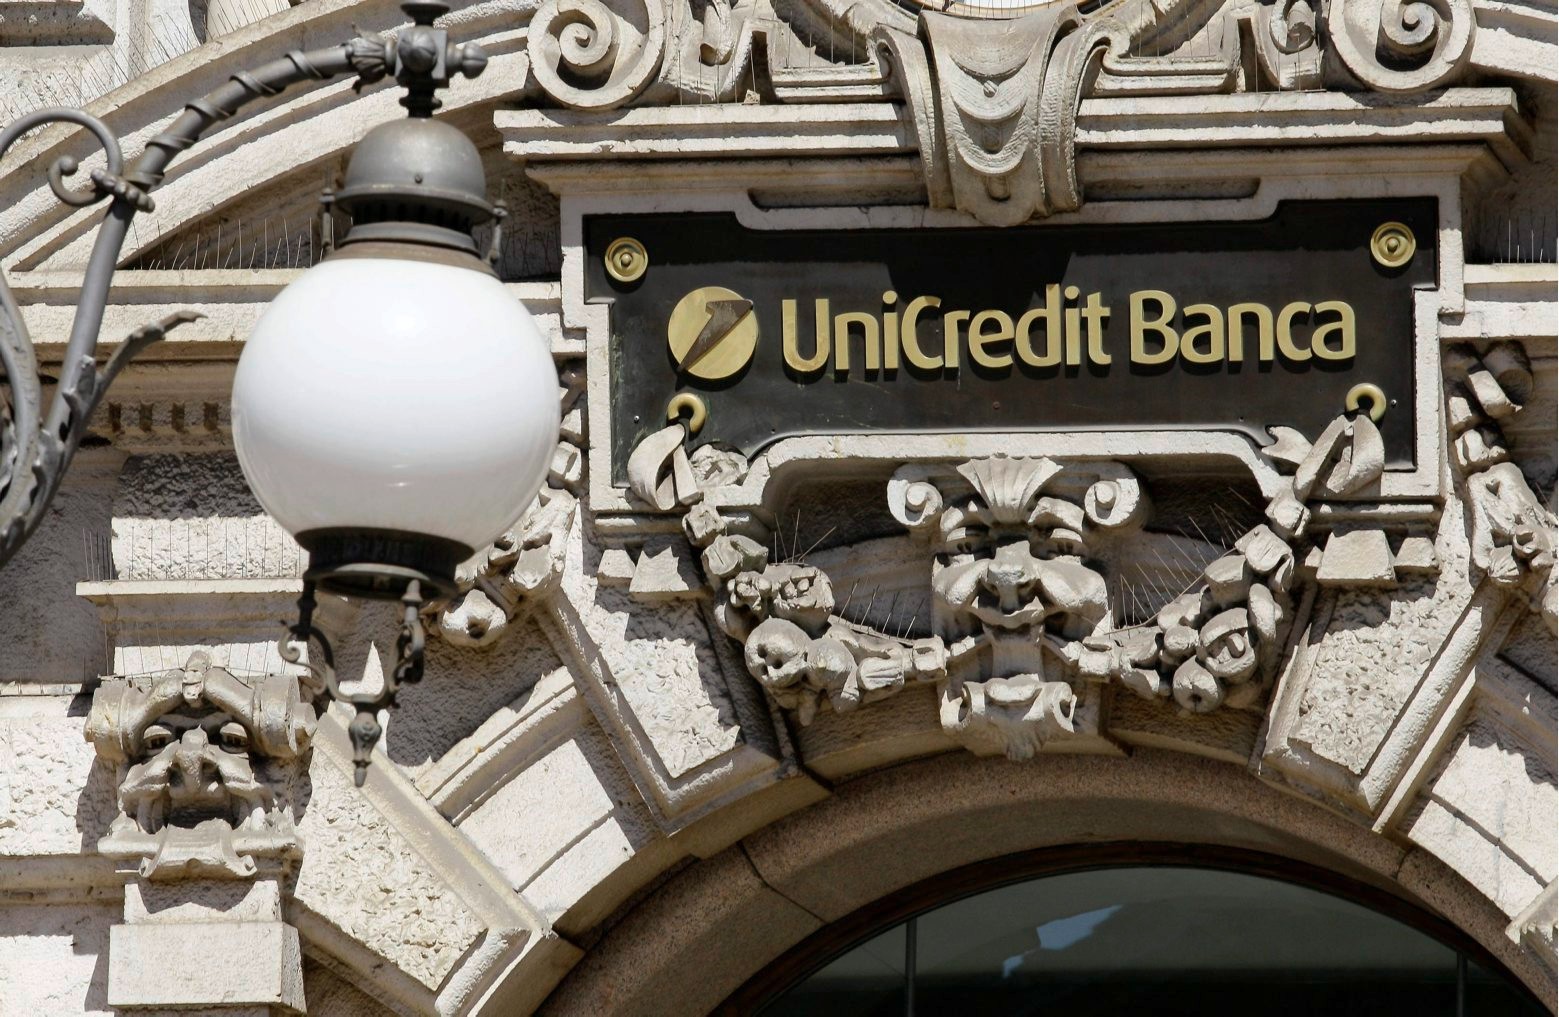 A view of the Unicredit bank headquarters in Milan, Italy, Monday, Aug. 27, 2012. Italy's UniCredit bank has confirmed that U.S. authorities are investigating its German unit for possibly breaking economic sanctions, but stopped short of naming Iran as the country it was dealing with. The Financial Times over the weekend reported that the probe was into suspected sanctions violations involving Iran, which is under international pressure because of its nuclear ambitions. UniCredit noted Monday that it first disclosed the existence of a U.S. probe in its 2011 financial statements and more recently in a capital increase prospectus, though it did not provide details.  (AP Photo/Antonio Calanni) Italy Unicredit Iran